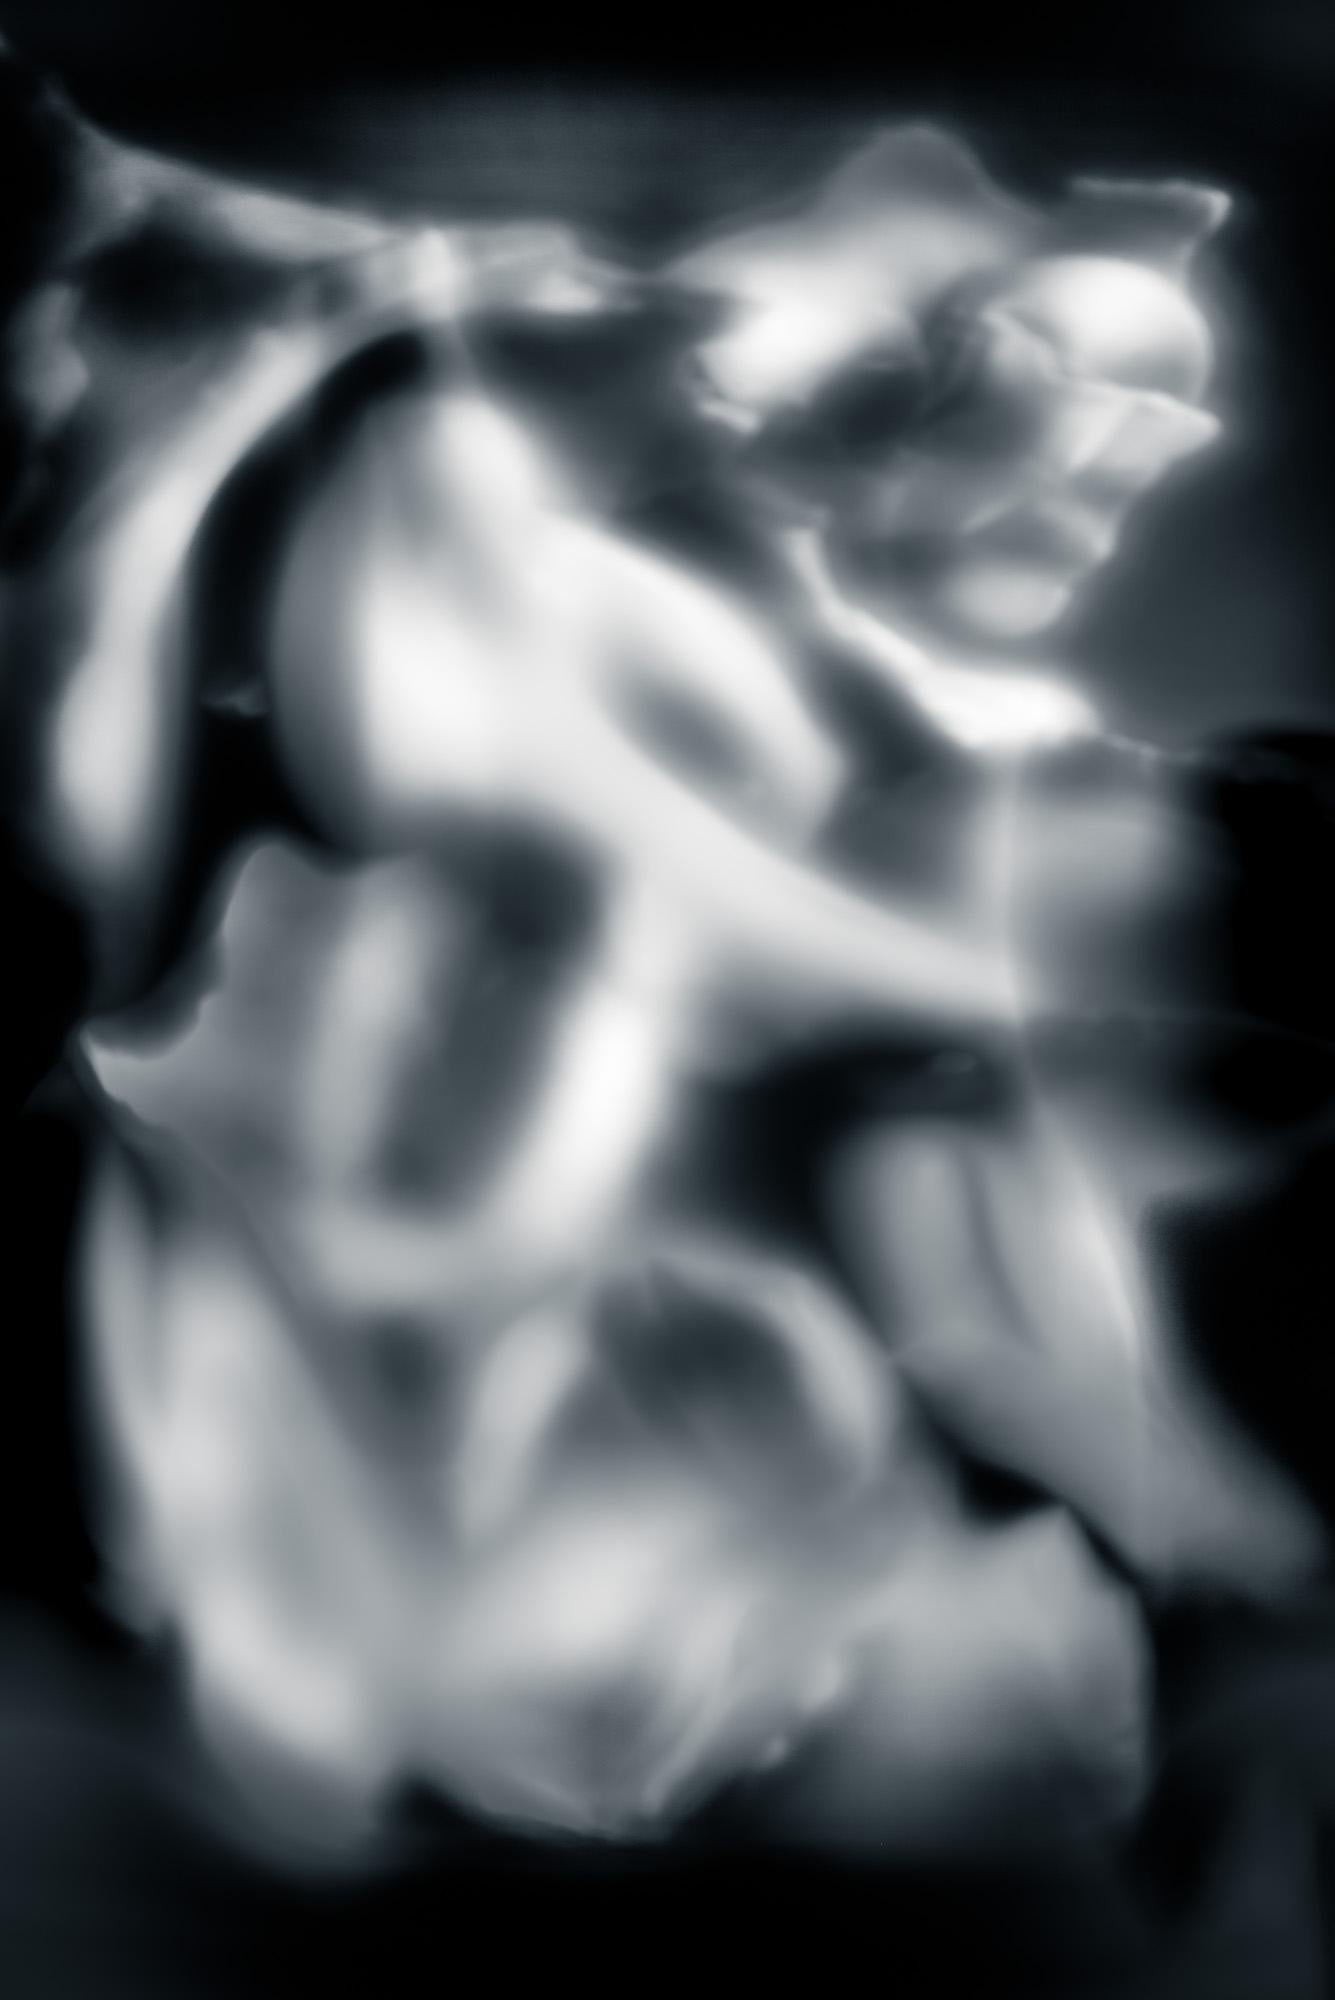 Howard Lewis Abstract Photograph - Abstract Black and White Photograph - Moments of Evolution #37 20 x 24